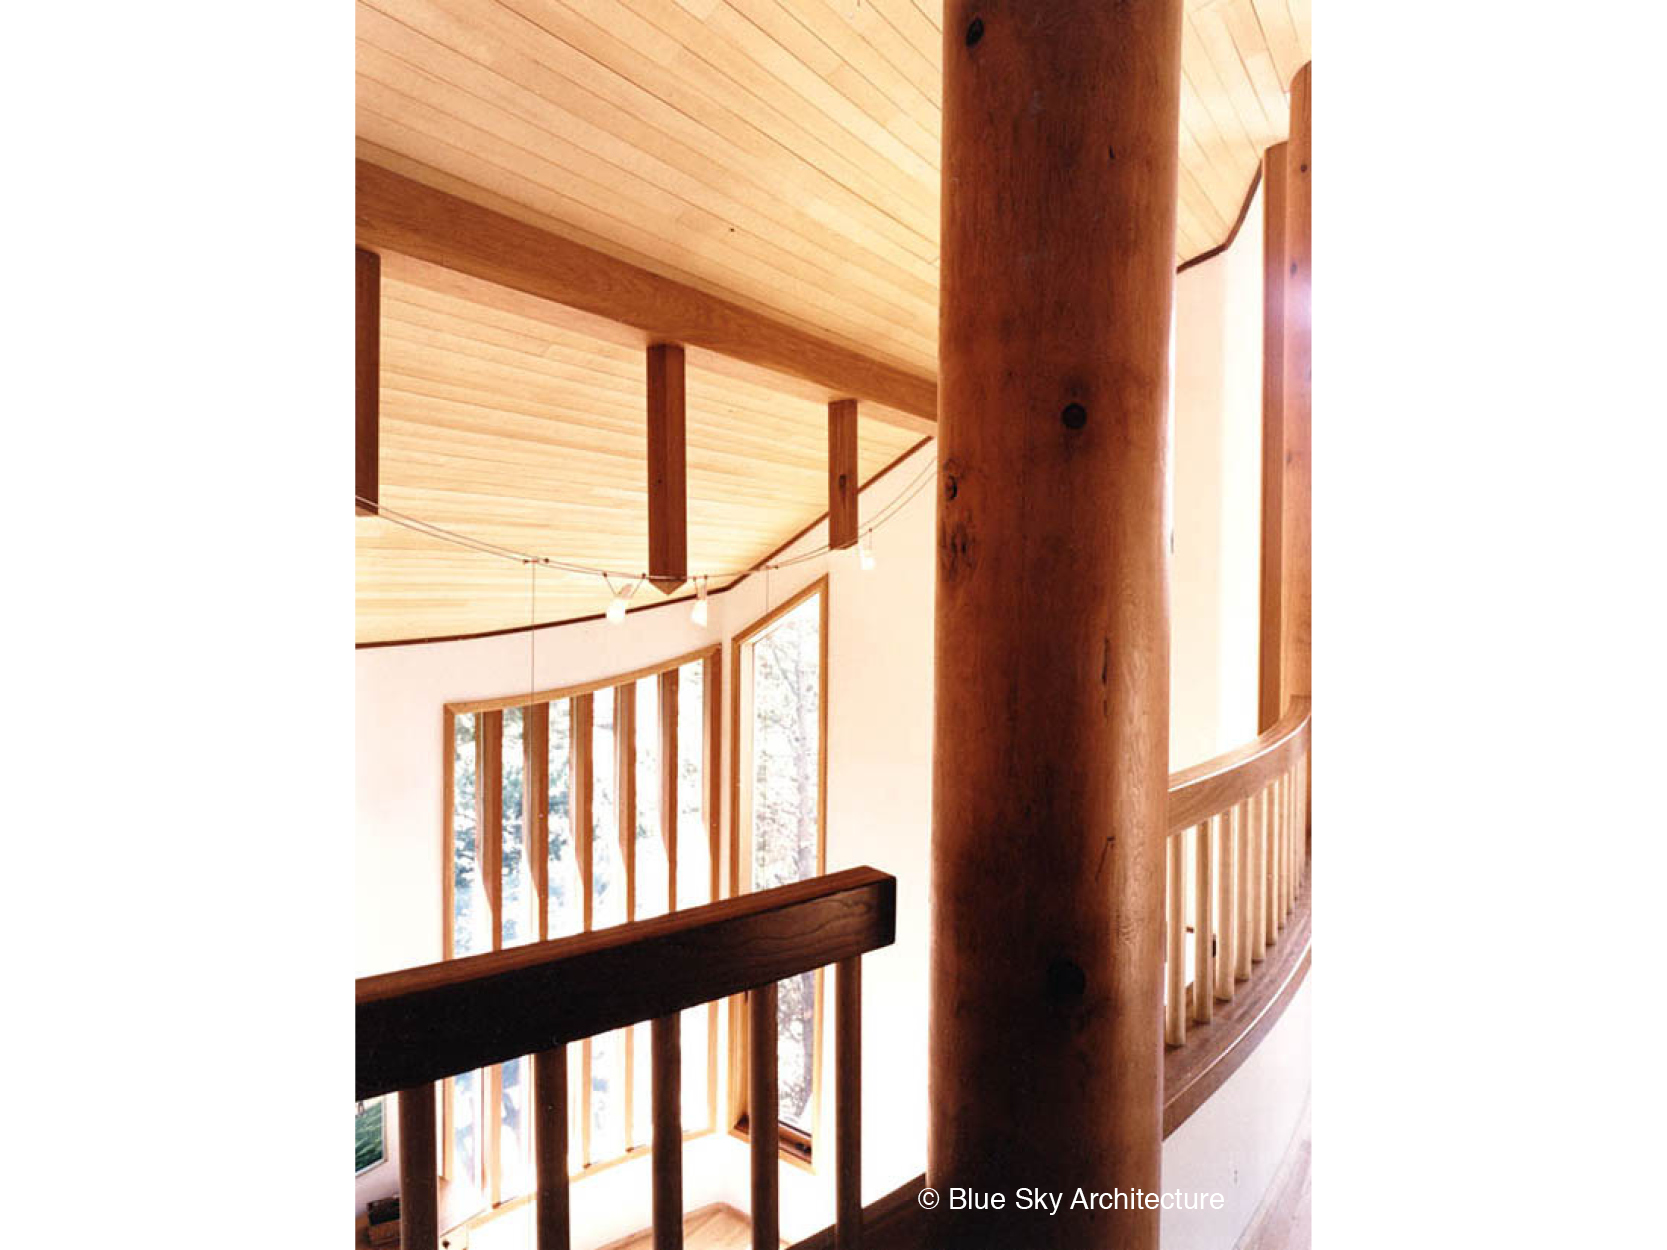 Heavy Timber Mezzanine with Fir Ceiling